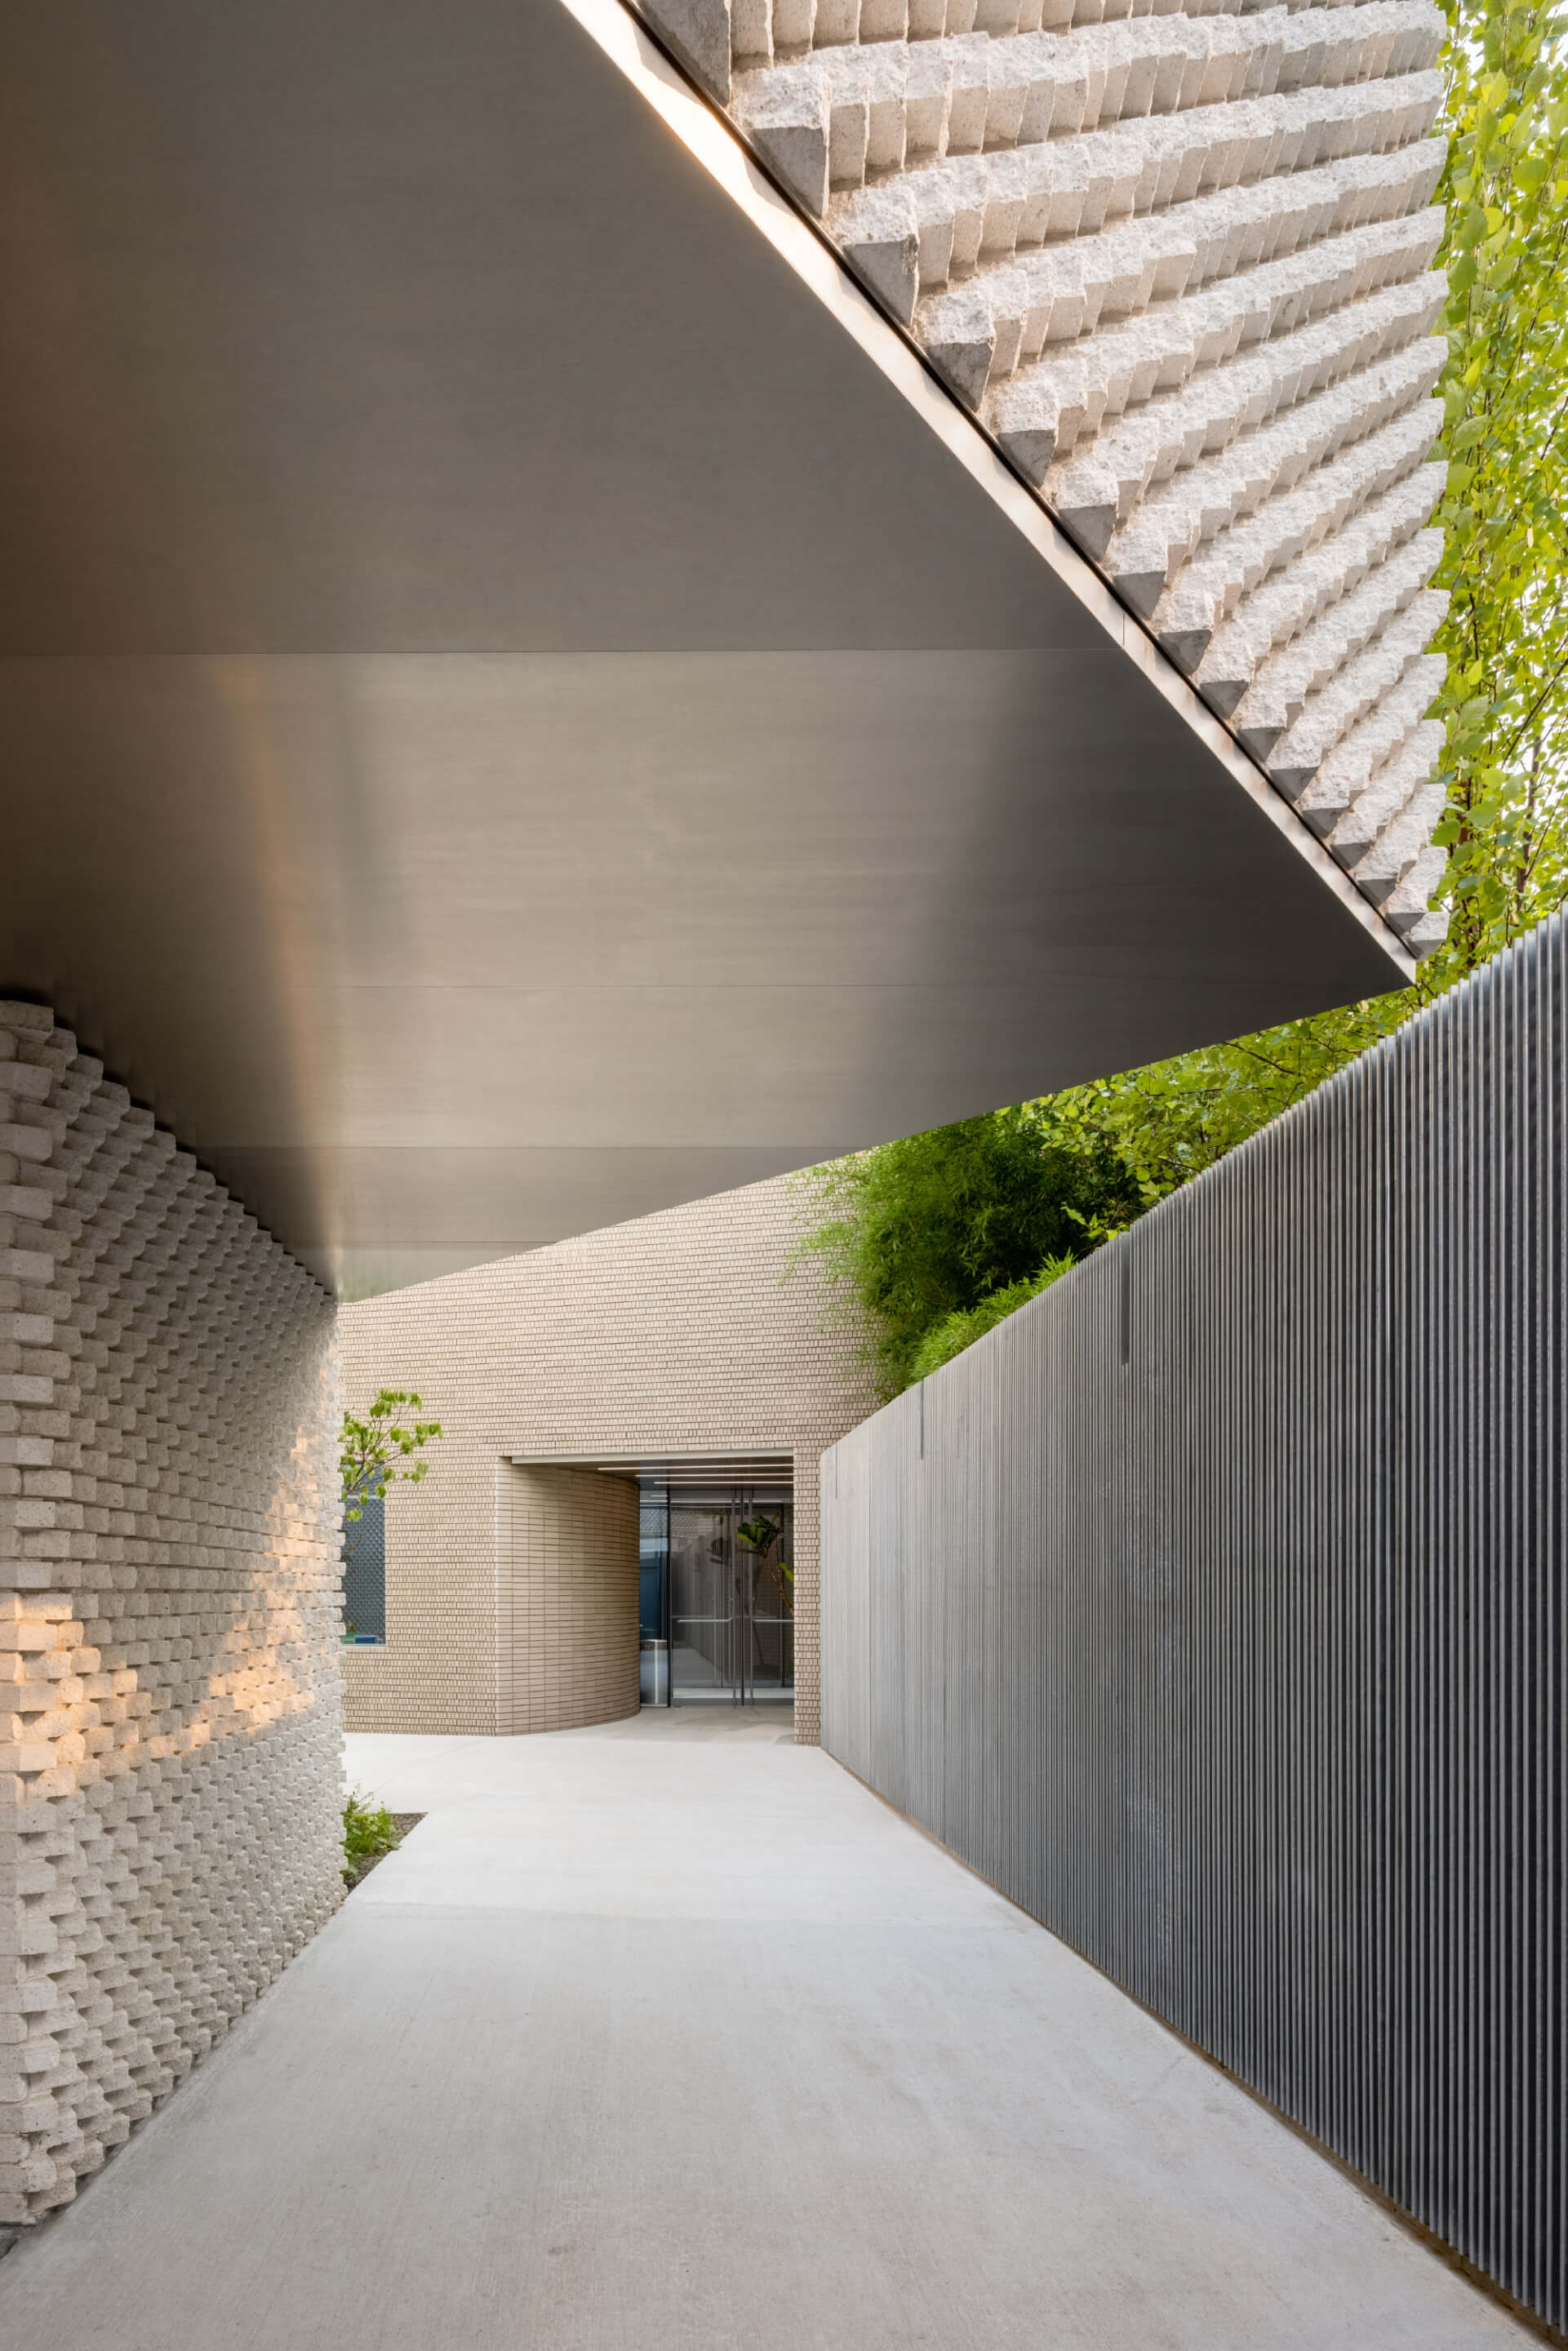 A cantilevering volume clad in tesselating brick at the amant foundation